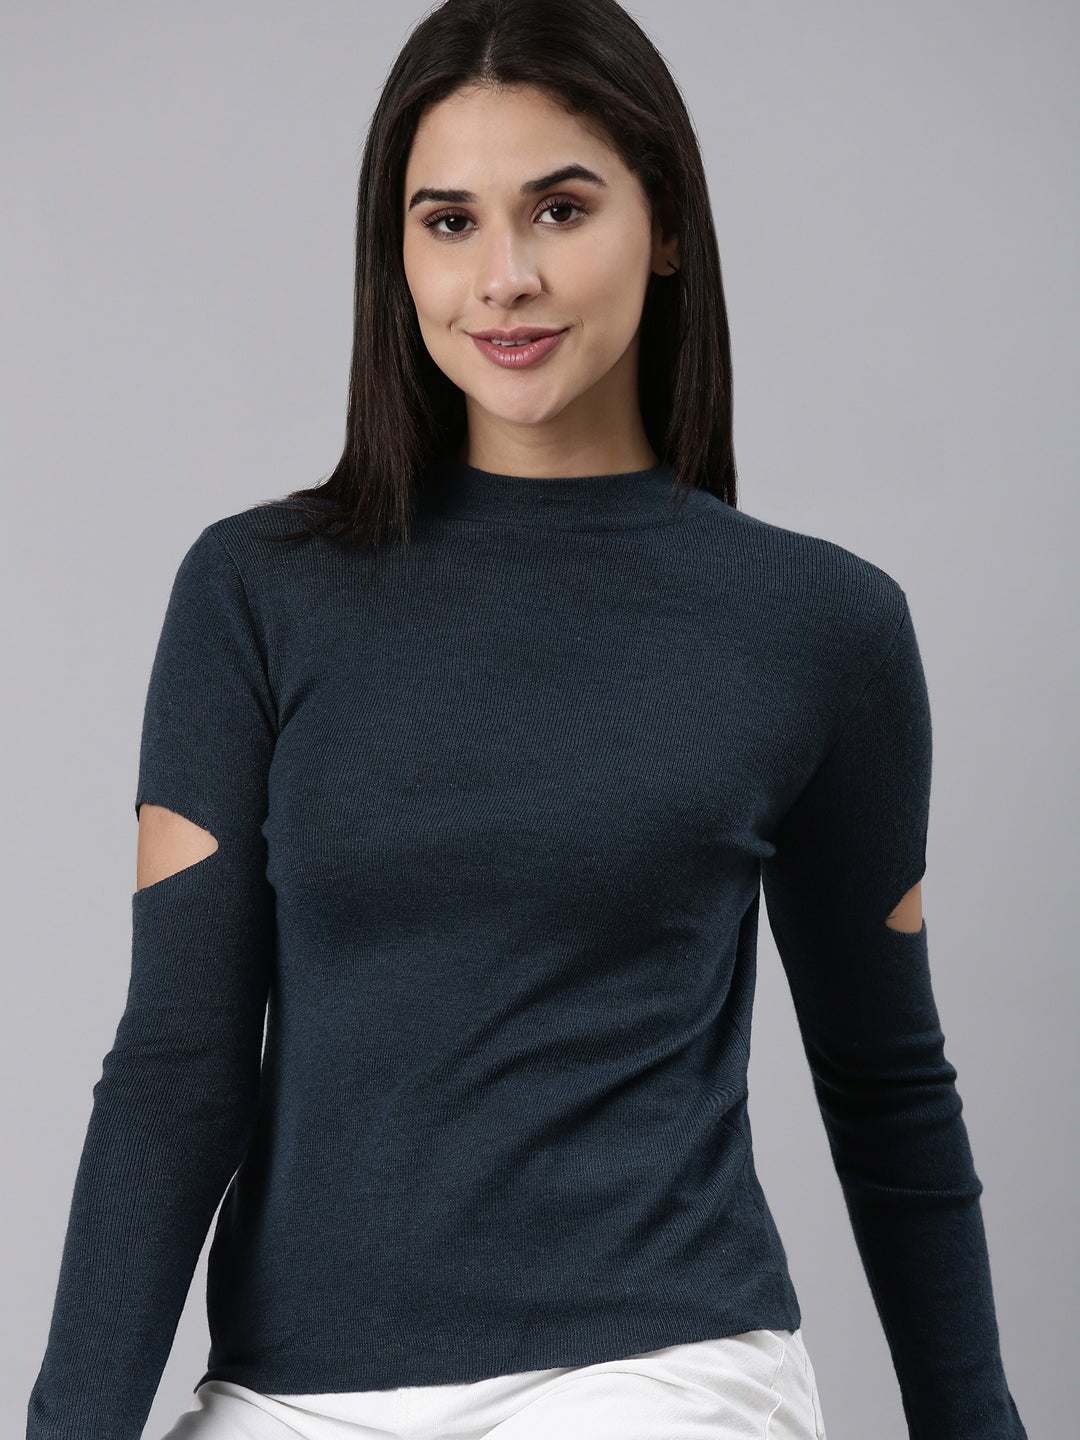 Women High Neck Solid Teal Fitted Top